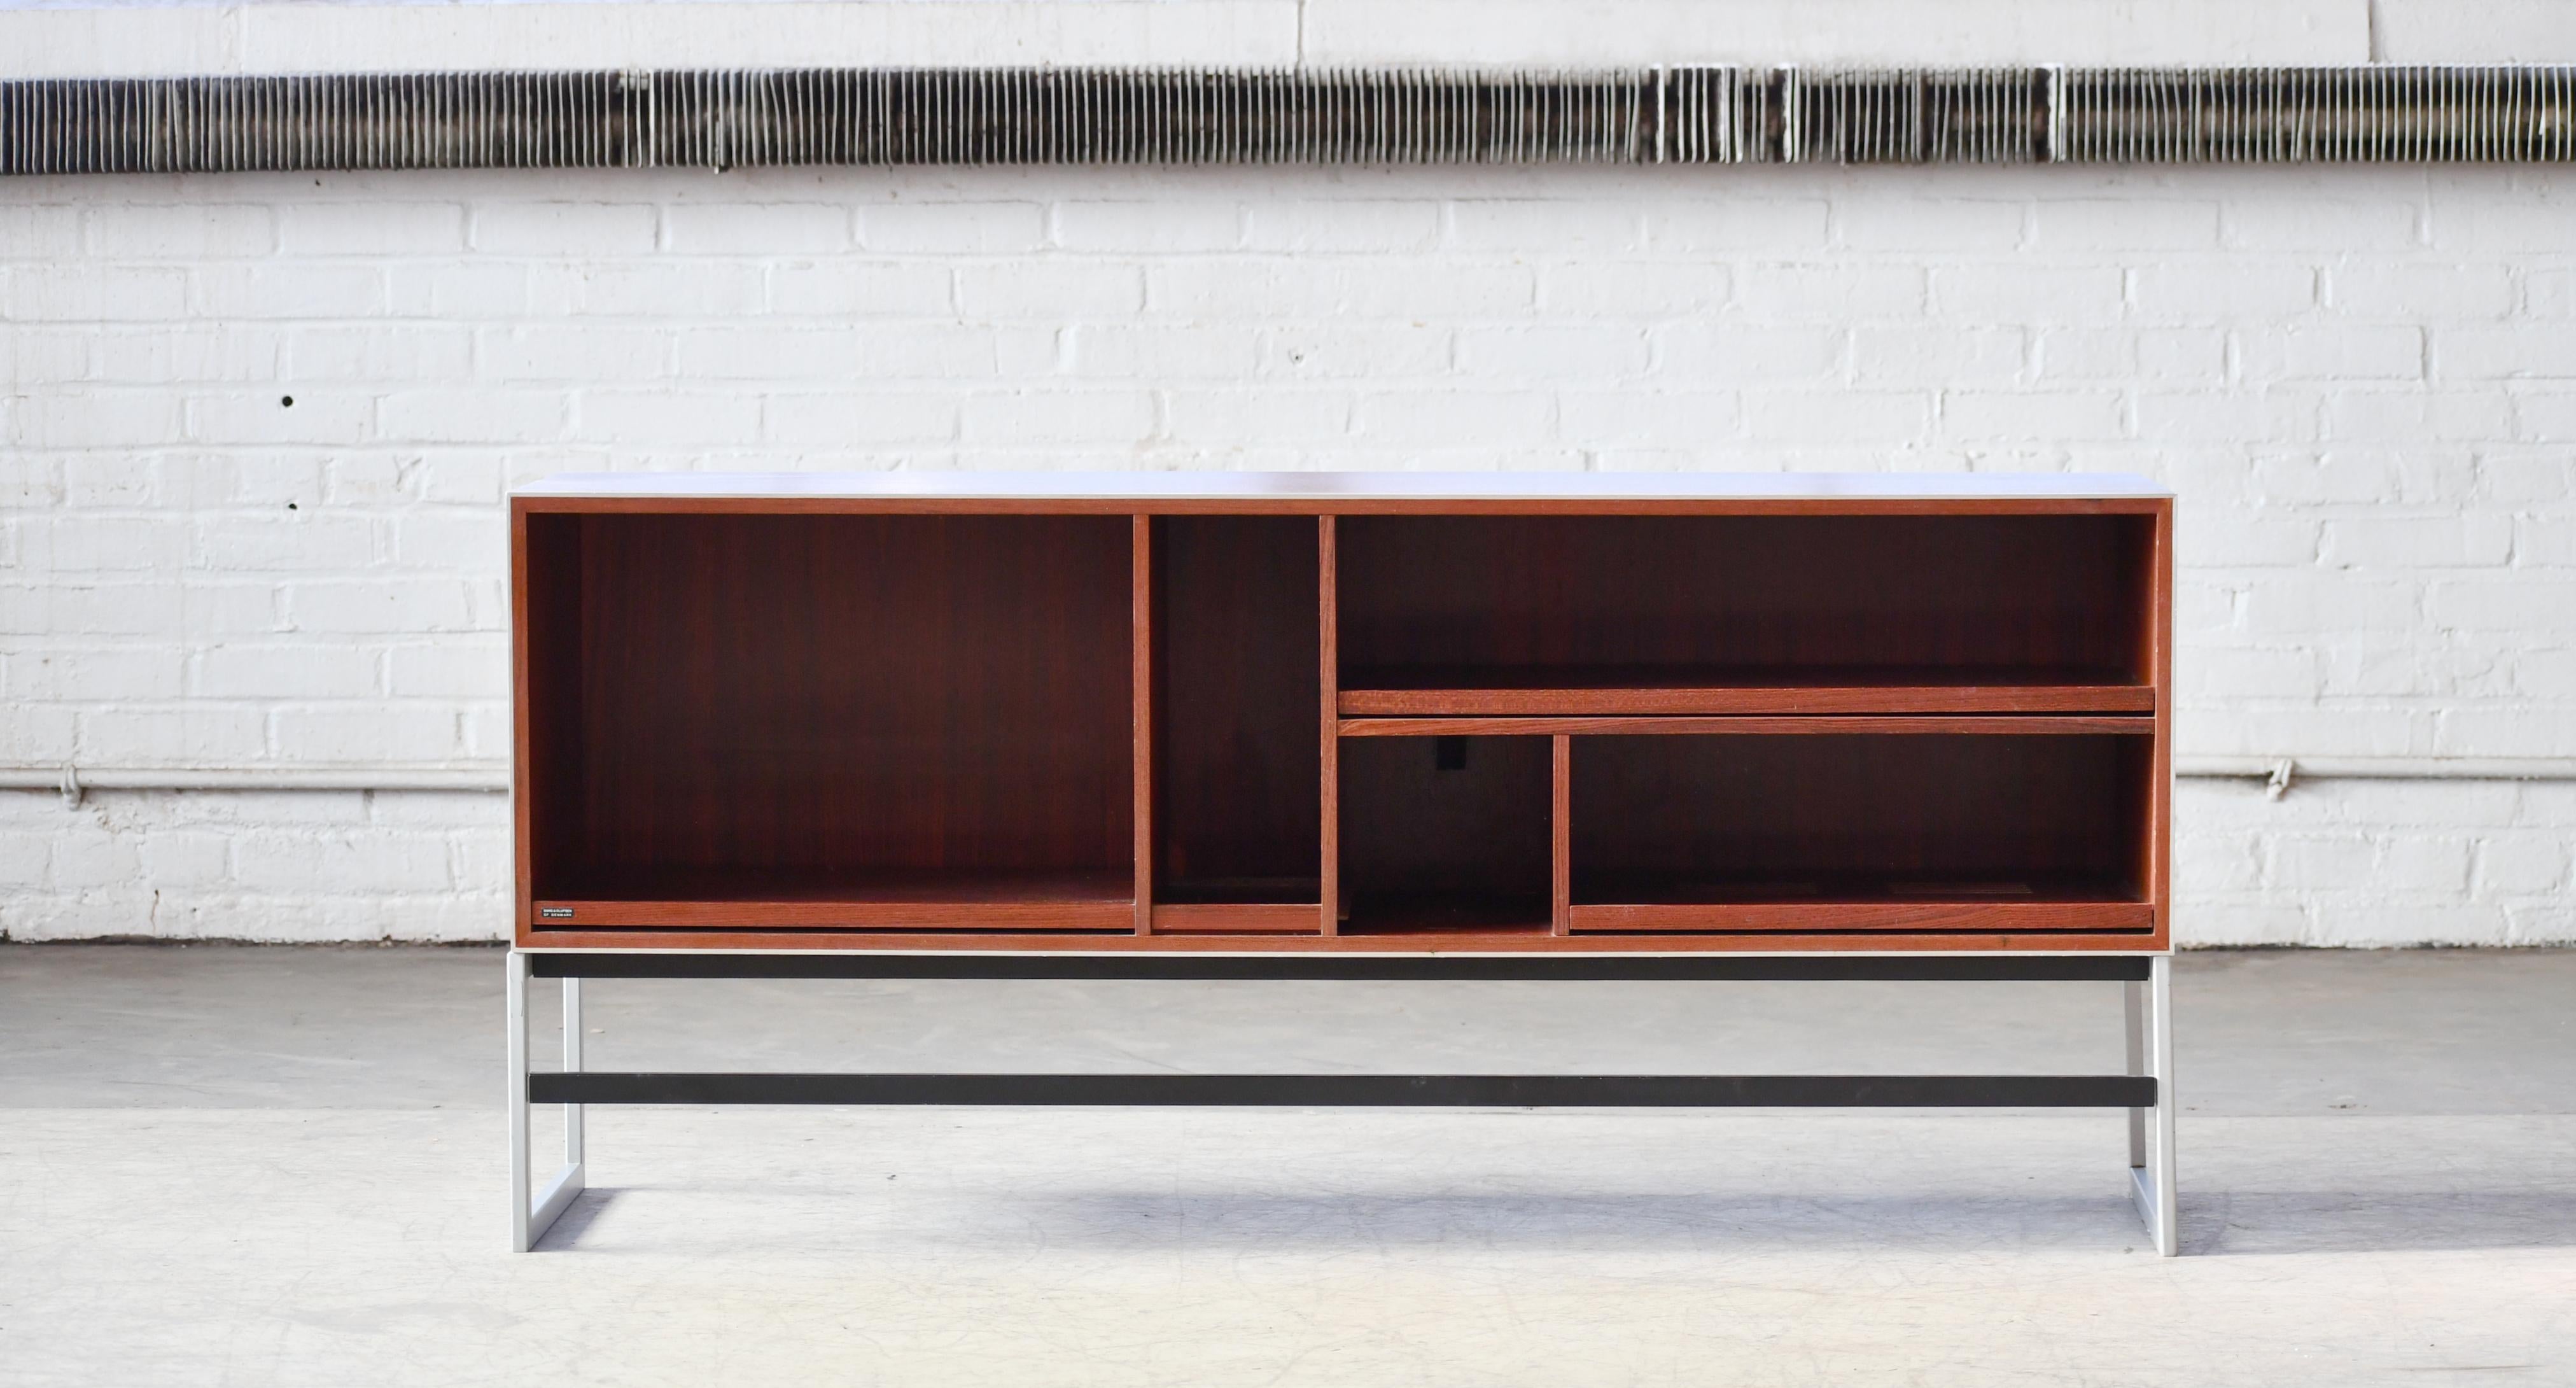 Very cool and hard to find Danish 1970s Bang & Olufsen media cabinet in rosewood and aluminum. Very functional and perfect for a turntable player. The shelves are vented to prevent overheating of stereo equipment and pull out for easy access.